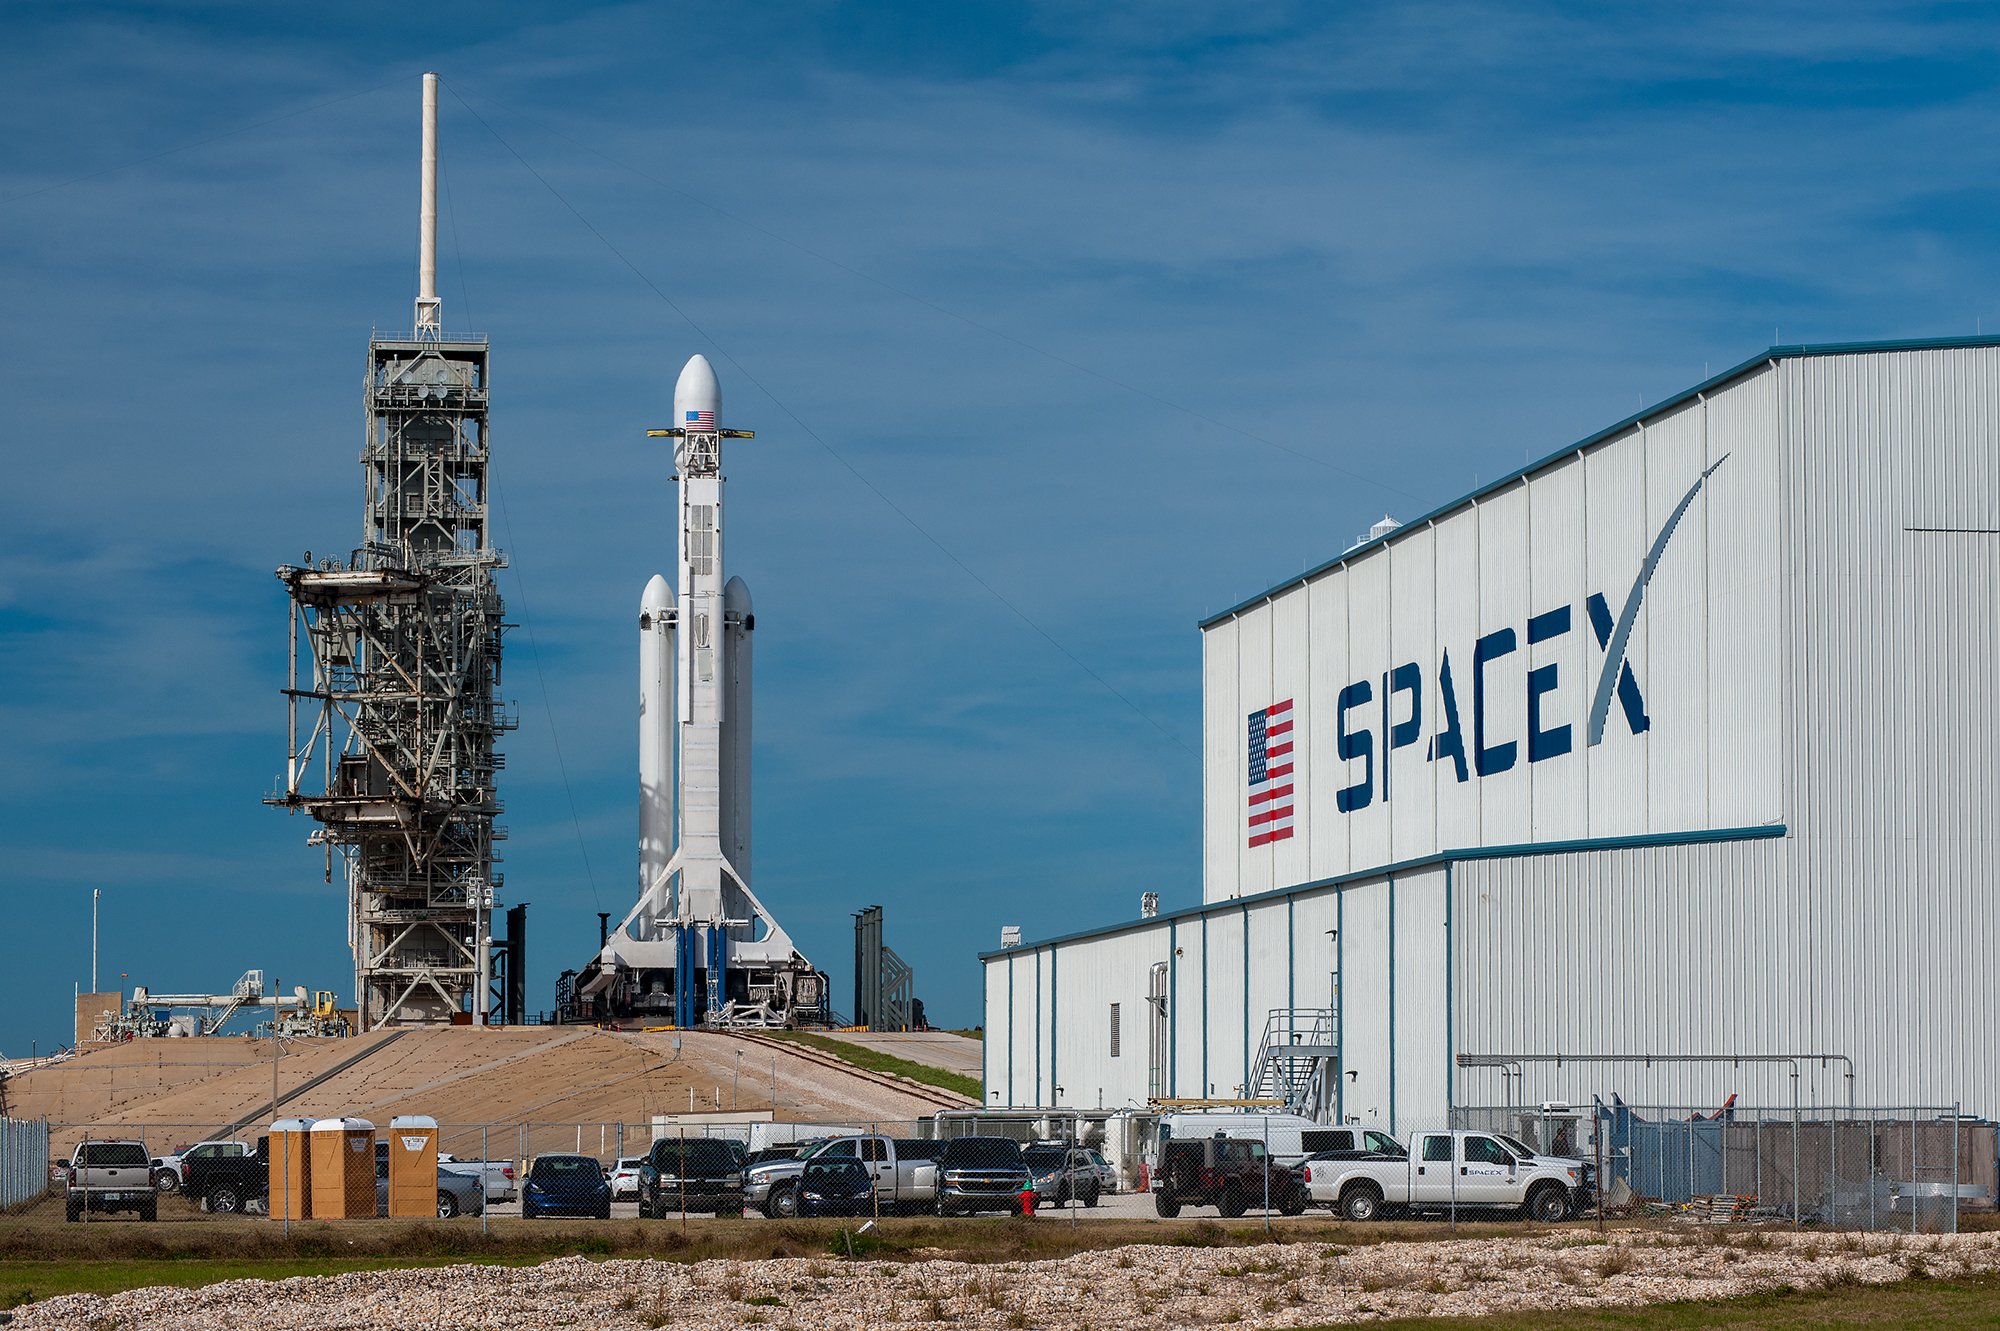 spacex-falcon-heavy-rocket-launch-pad-39a-kennedy-space-center-dave-mosher-business-insider.jpg